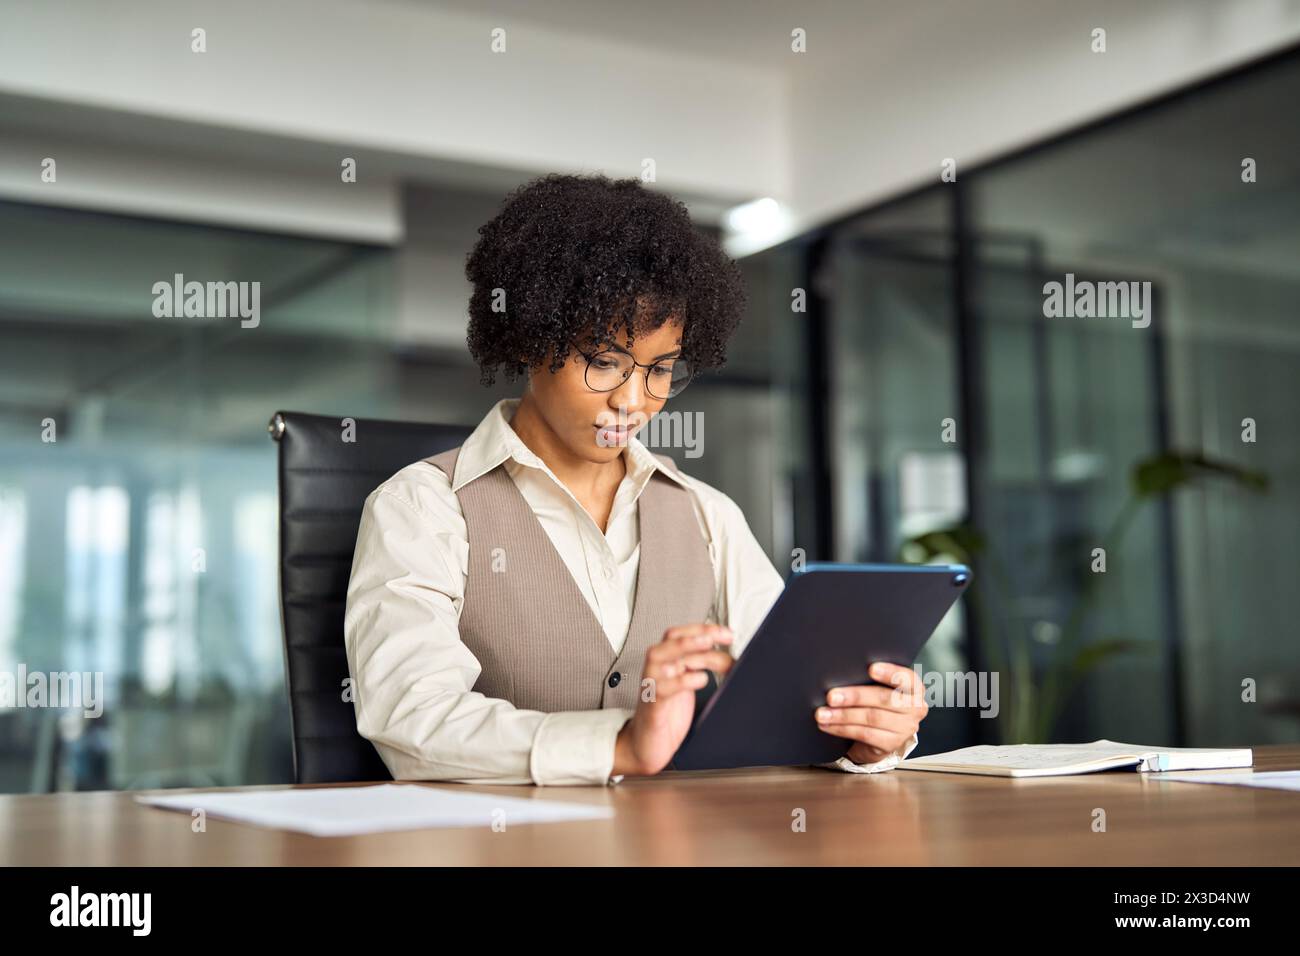 Young busy African business woman manager using tablet working in office. Stock Photo